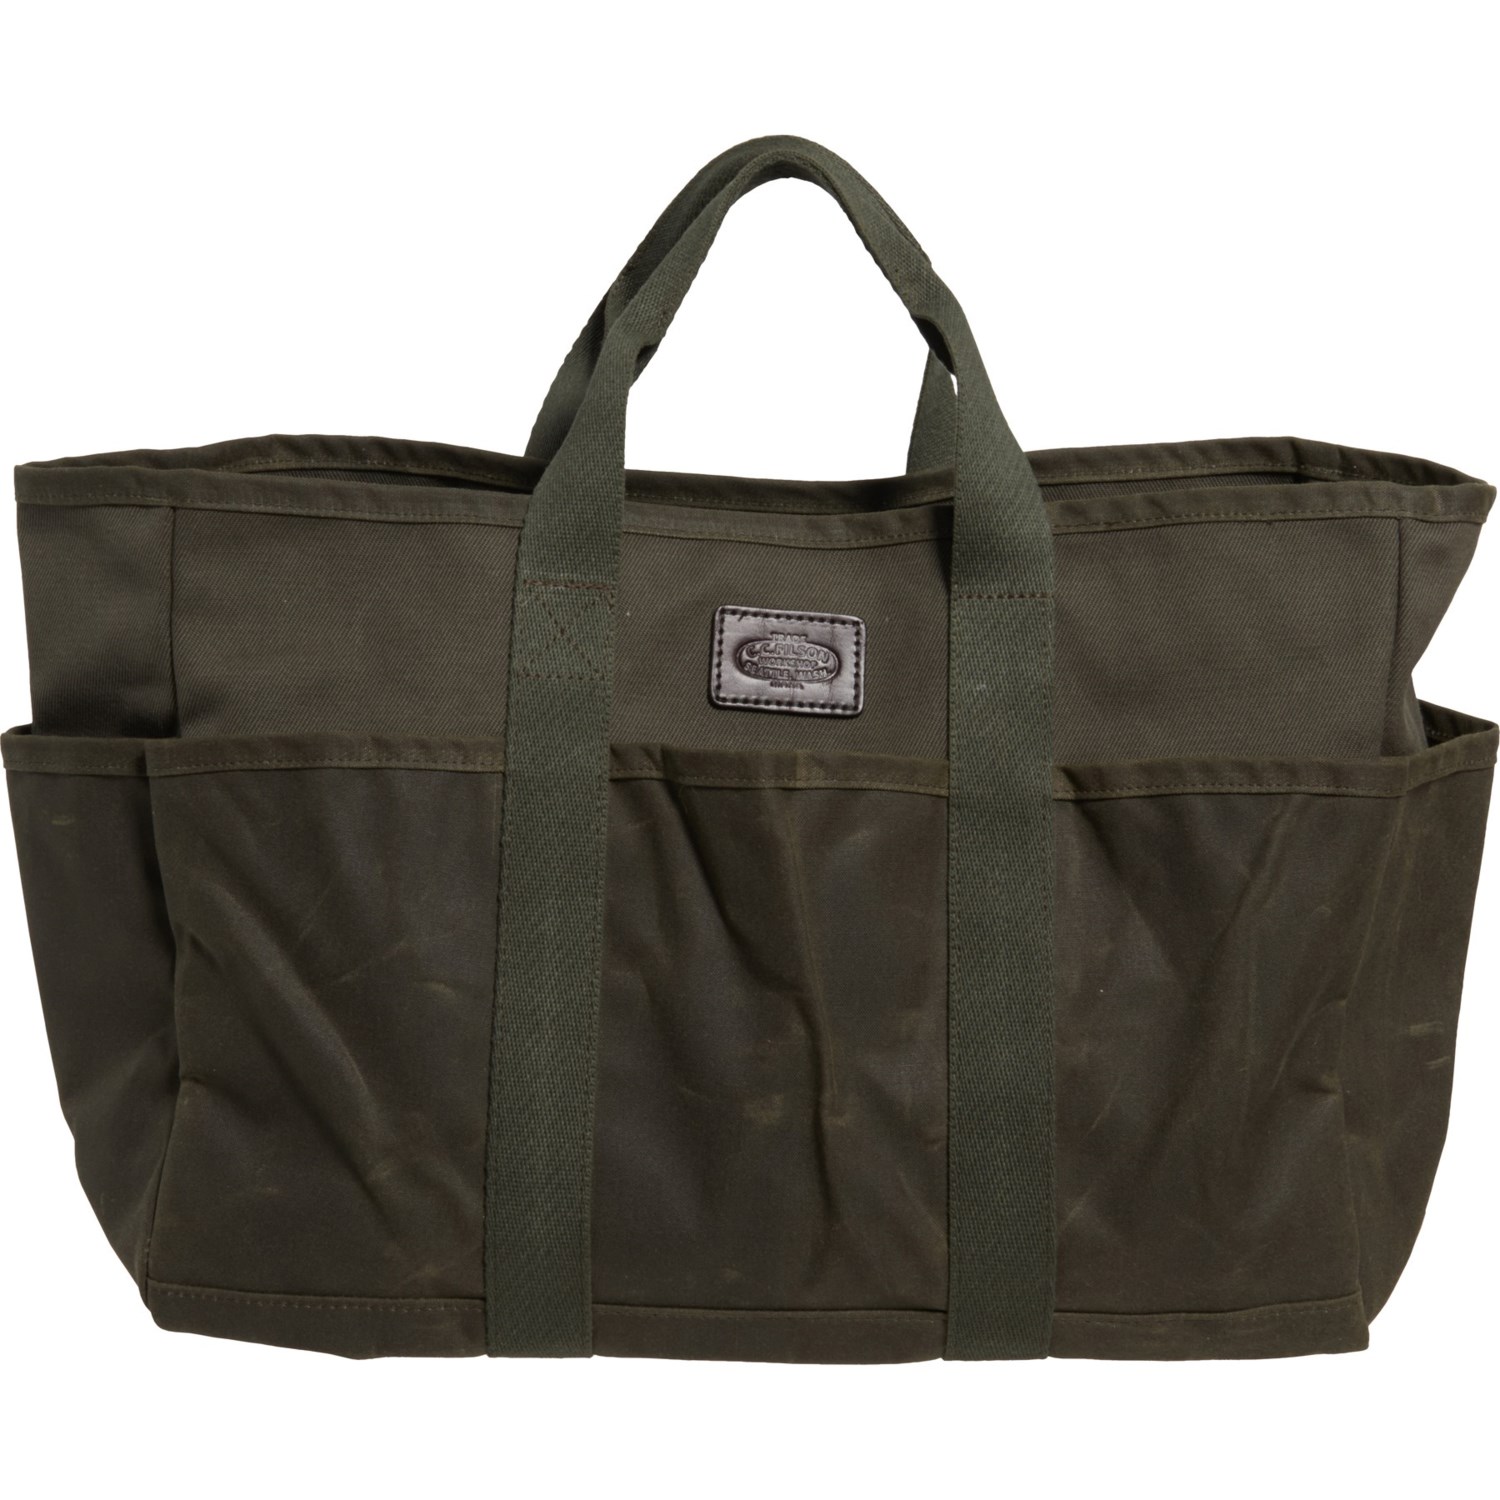 utility tote bag with zipper